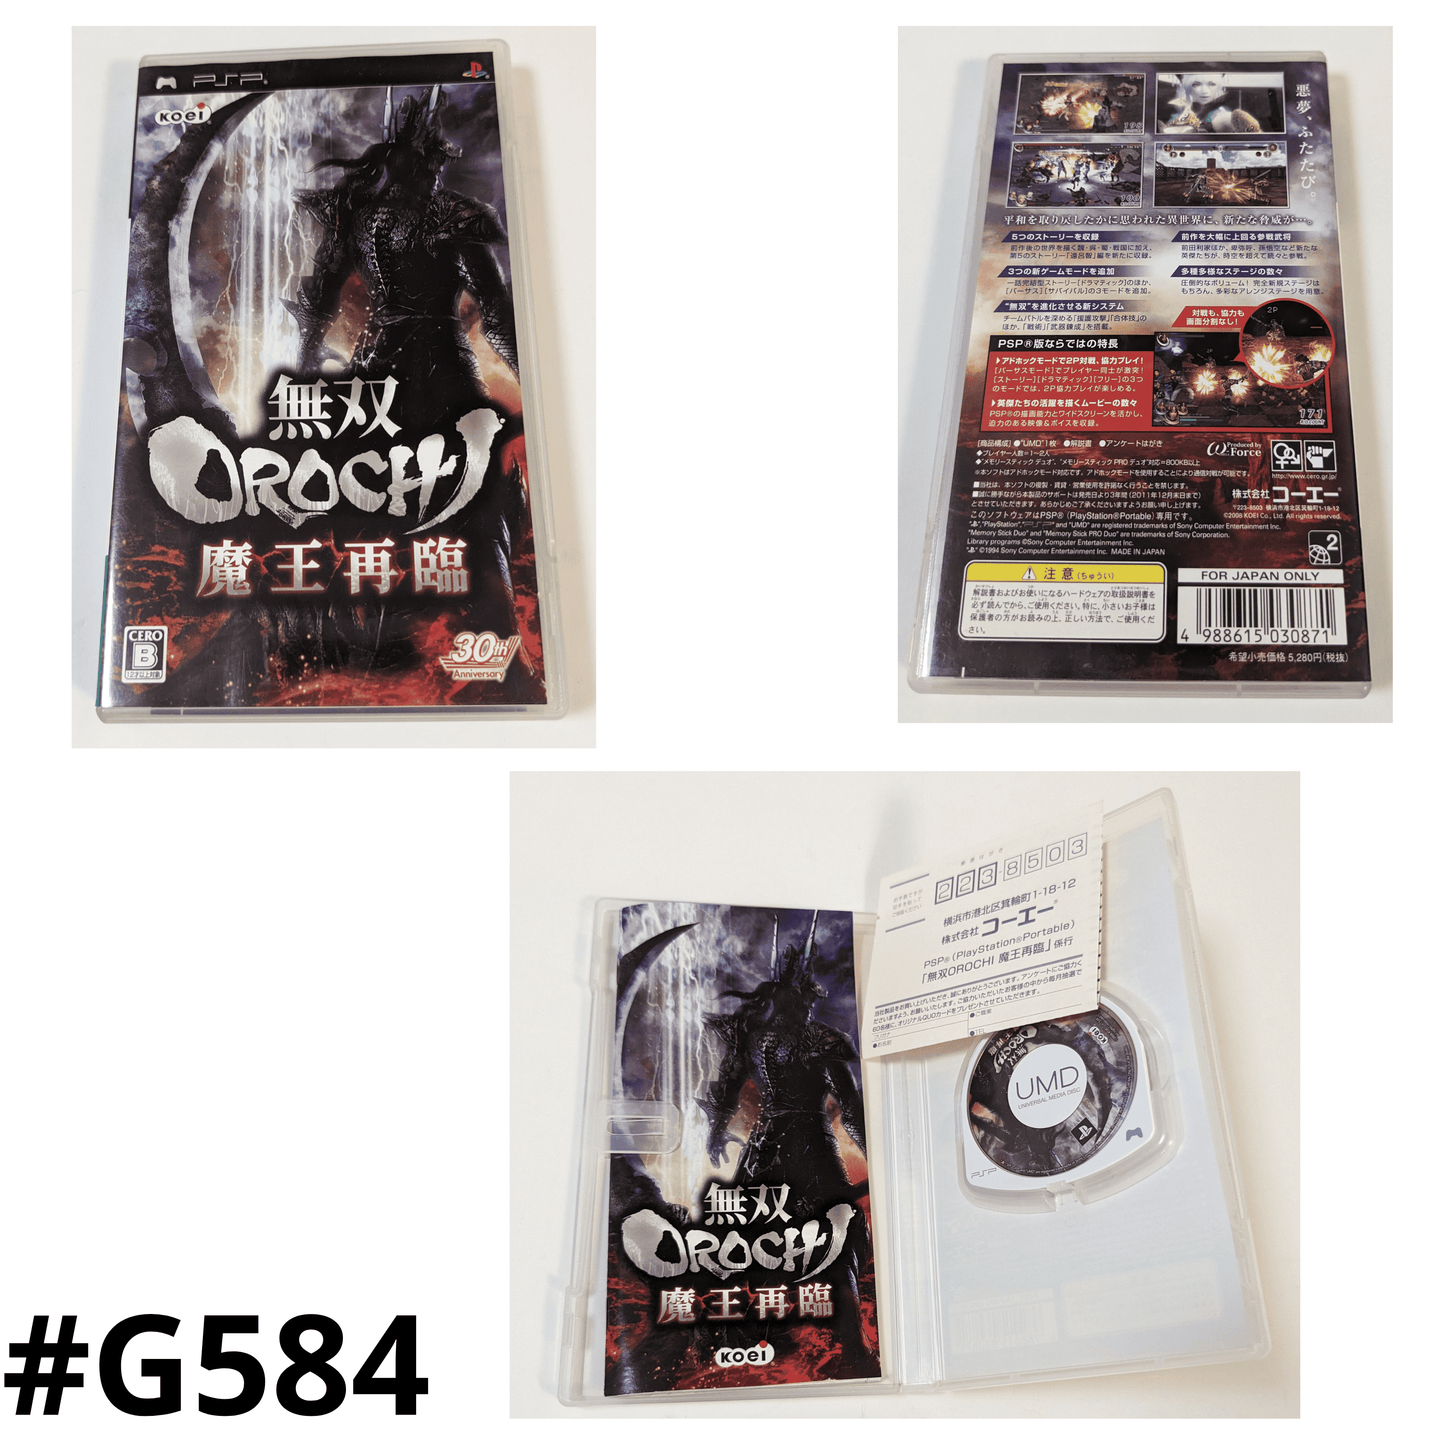 OROCHI: Demon King Second Coming | PSP | Japanese